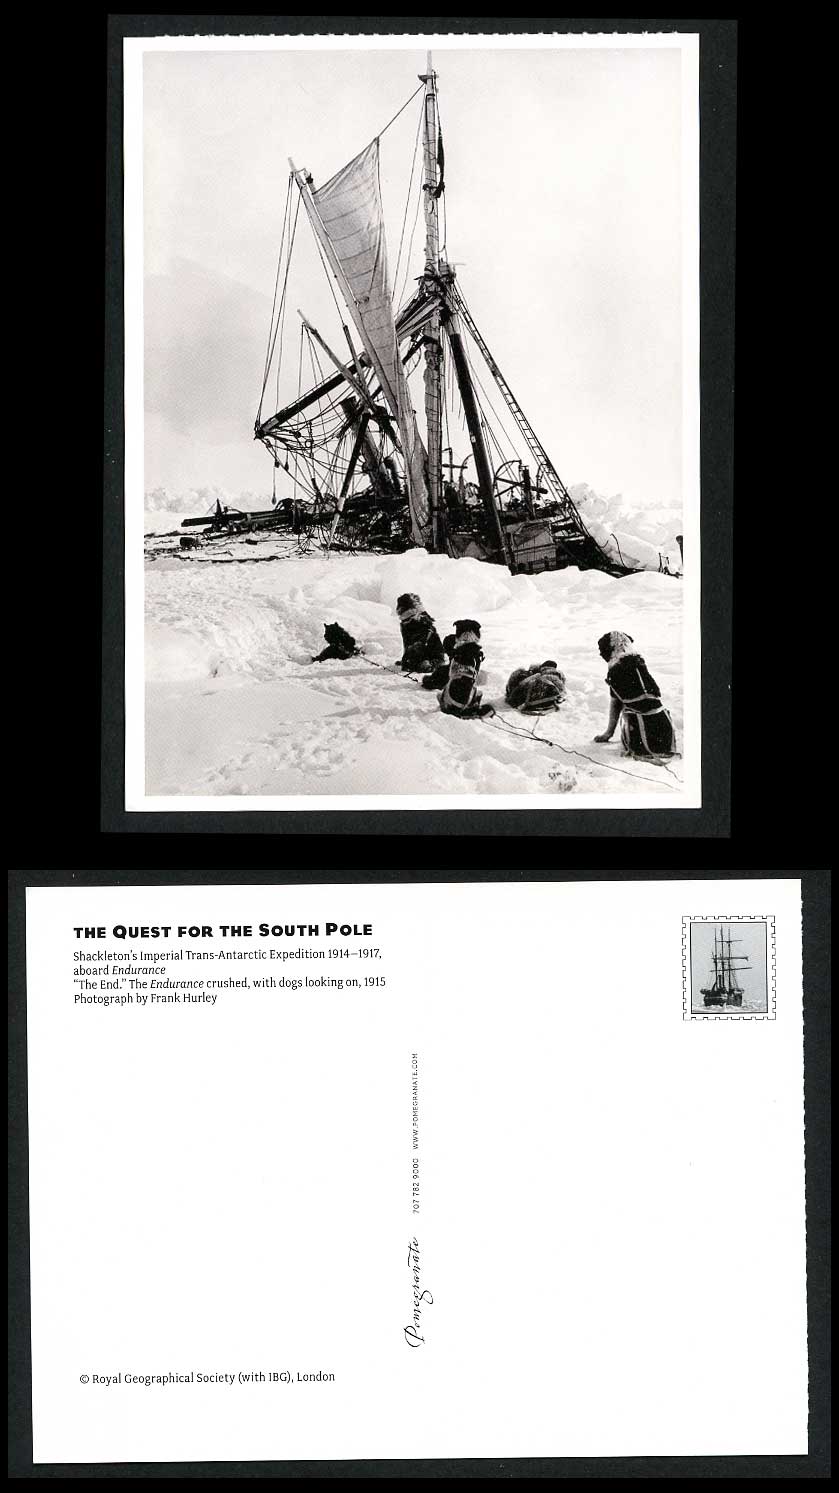 Imperial Trans-Antarctic Expedition 1915 Postcard The End Endurance Crushed DOGS